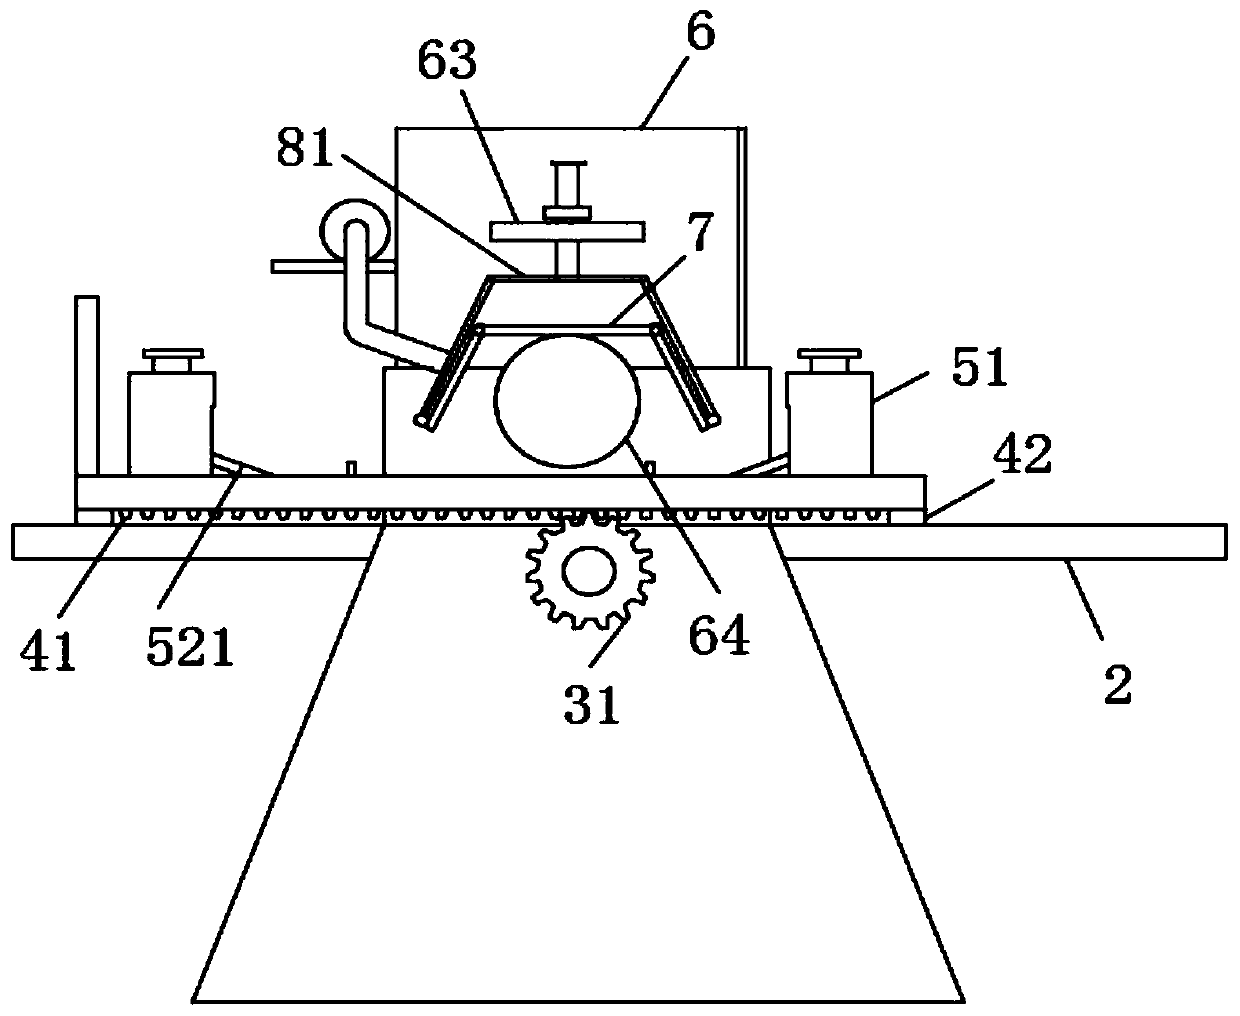 Grinding machine with positioning device for preventing sweeps from splashing